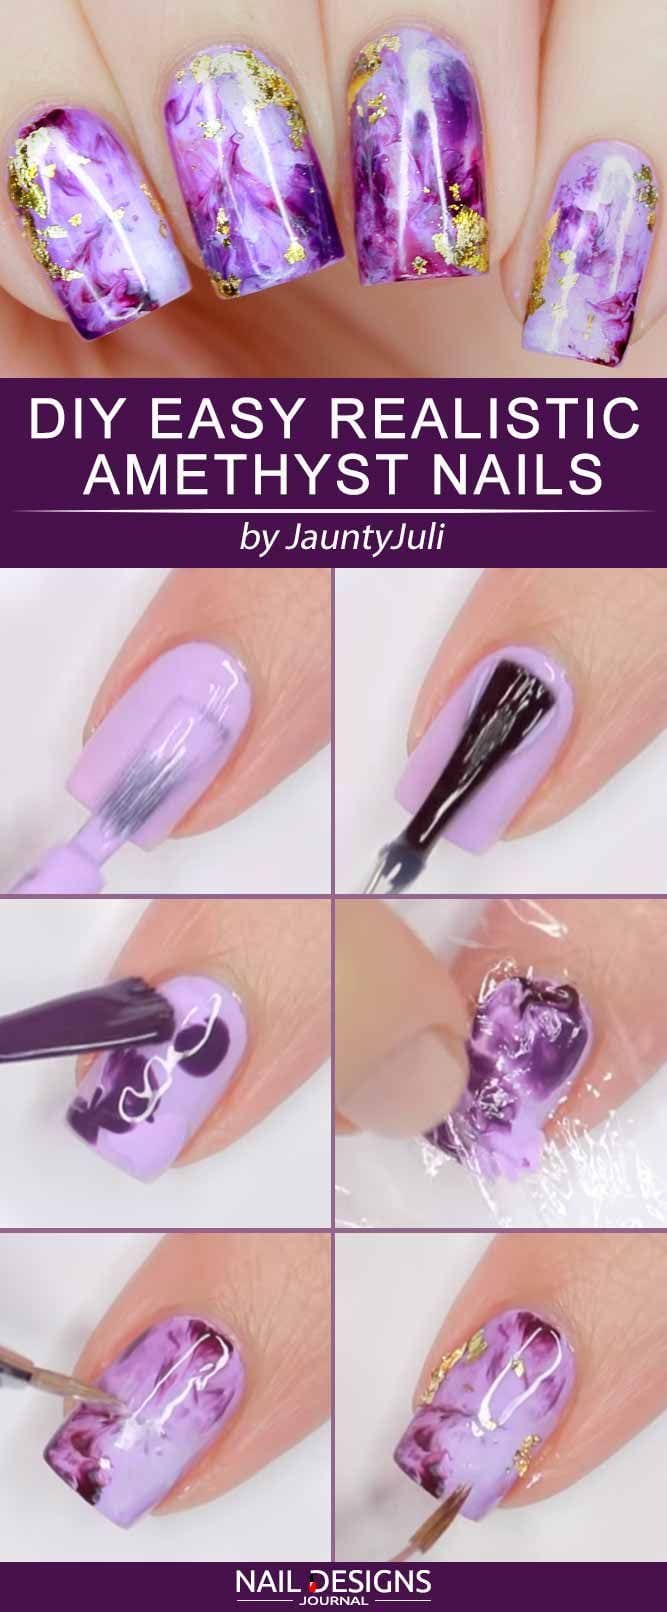 [ad_1]

DIY Easy Realistic Amethyst Nails #amethystnails #marblenails #purplenails #foilnails #squarenails ❤️ There are so many DIY nails ideas out there and we did our best to gather the trendiest ones here. ❤️ See more: naildesignsjourna… #naildesignsjournal #nails #nailart #naildesigns #diynails…